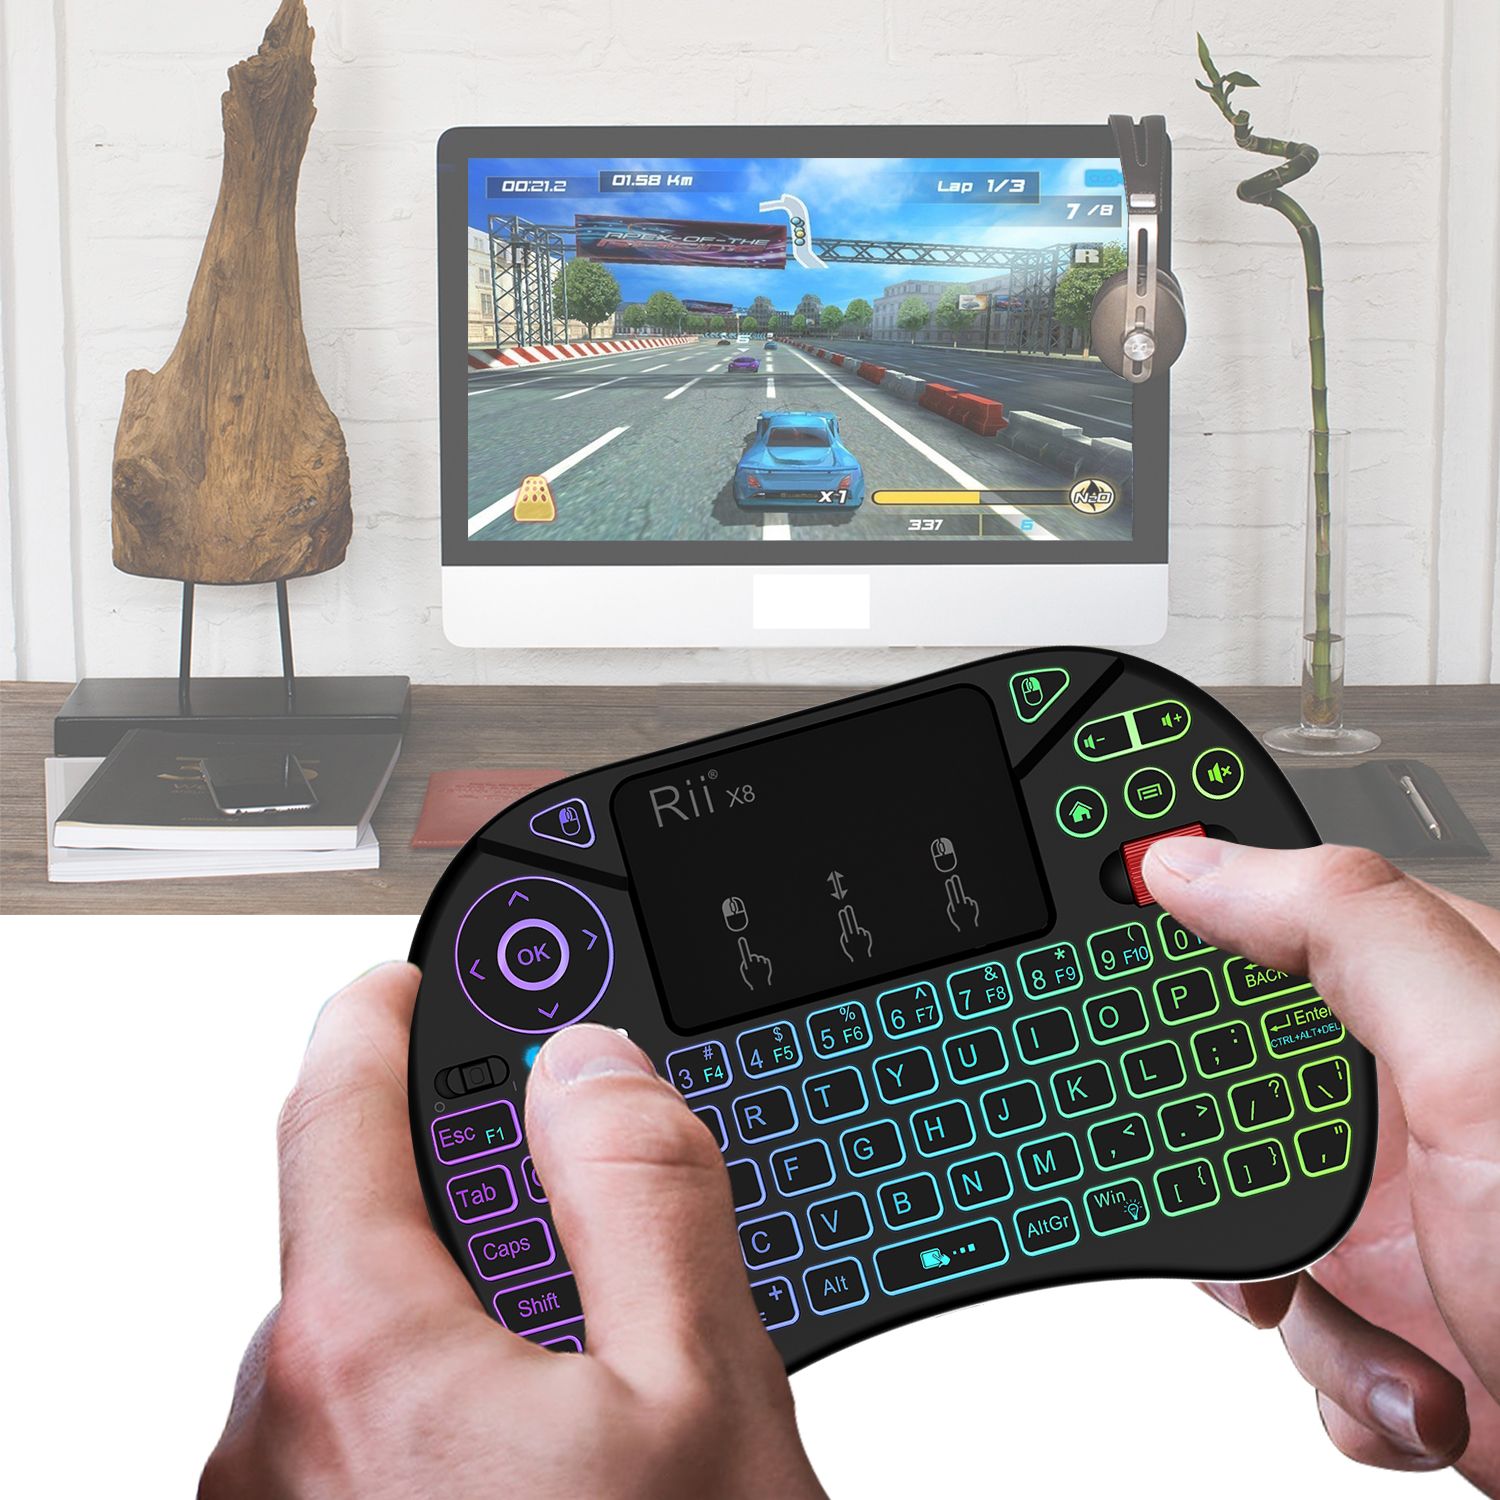 RII-X8-Colorful-Backlit-24G-Air-Mouse-Mini-Wireless-Keyboard-Touchpad-for-Android-TV-Box-Laptop-1271500